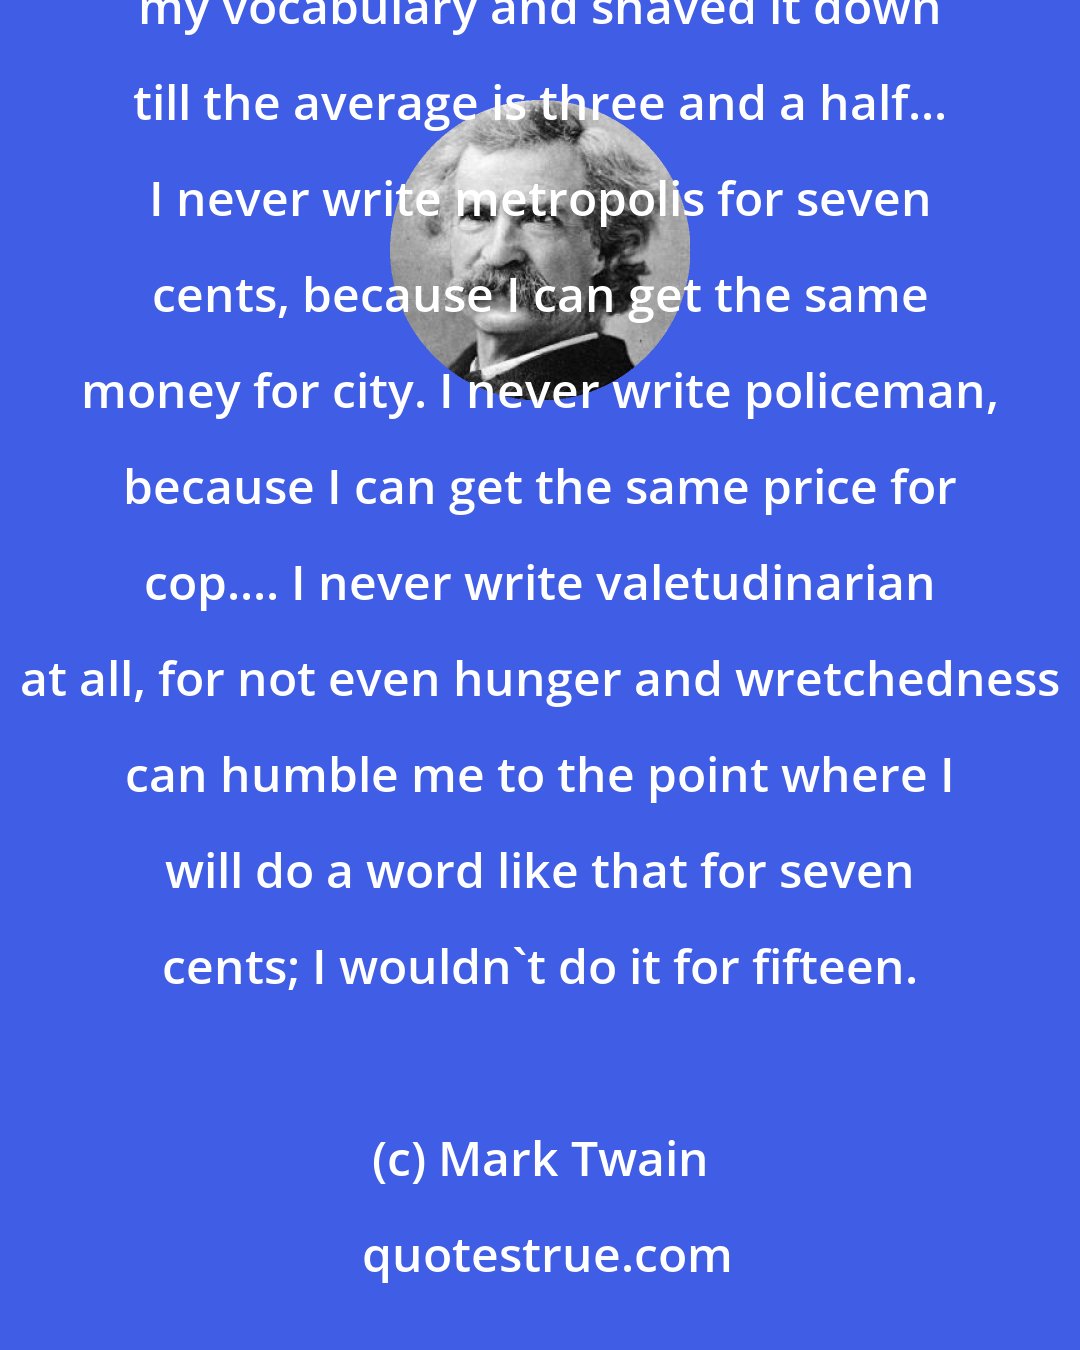 Mark Twain: An average English word is four letters and a half. By hard, honest labor I've dug all the large words out of my vocabulary and shaved it down till the average is three and a half... I never write metropolis for seven cents, because I can get the same money for city. I never write policeman, because I can get the same price for cop.... I never write valetudinarian at all, for not even hunger and wretchedness can humble me to the point where I will do a word like that for seven cents; I wouldn't do it for fifteen.